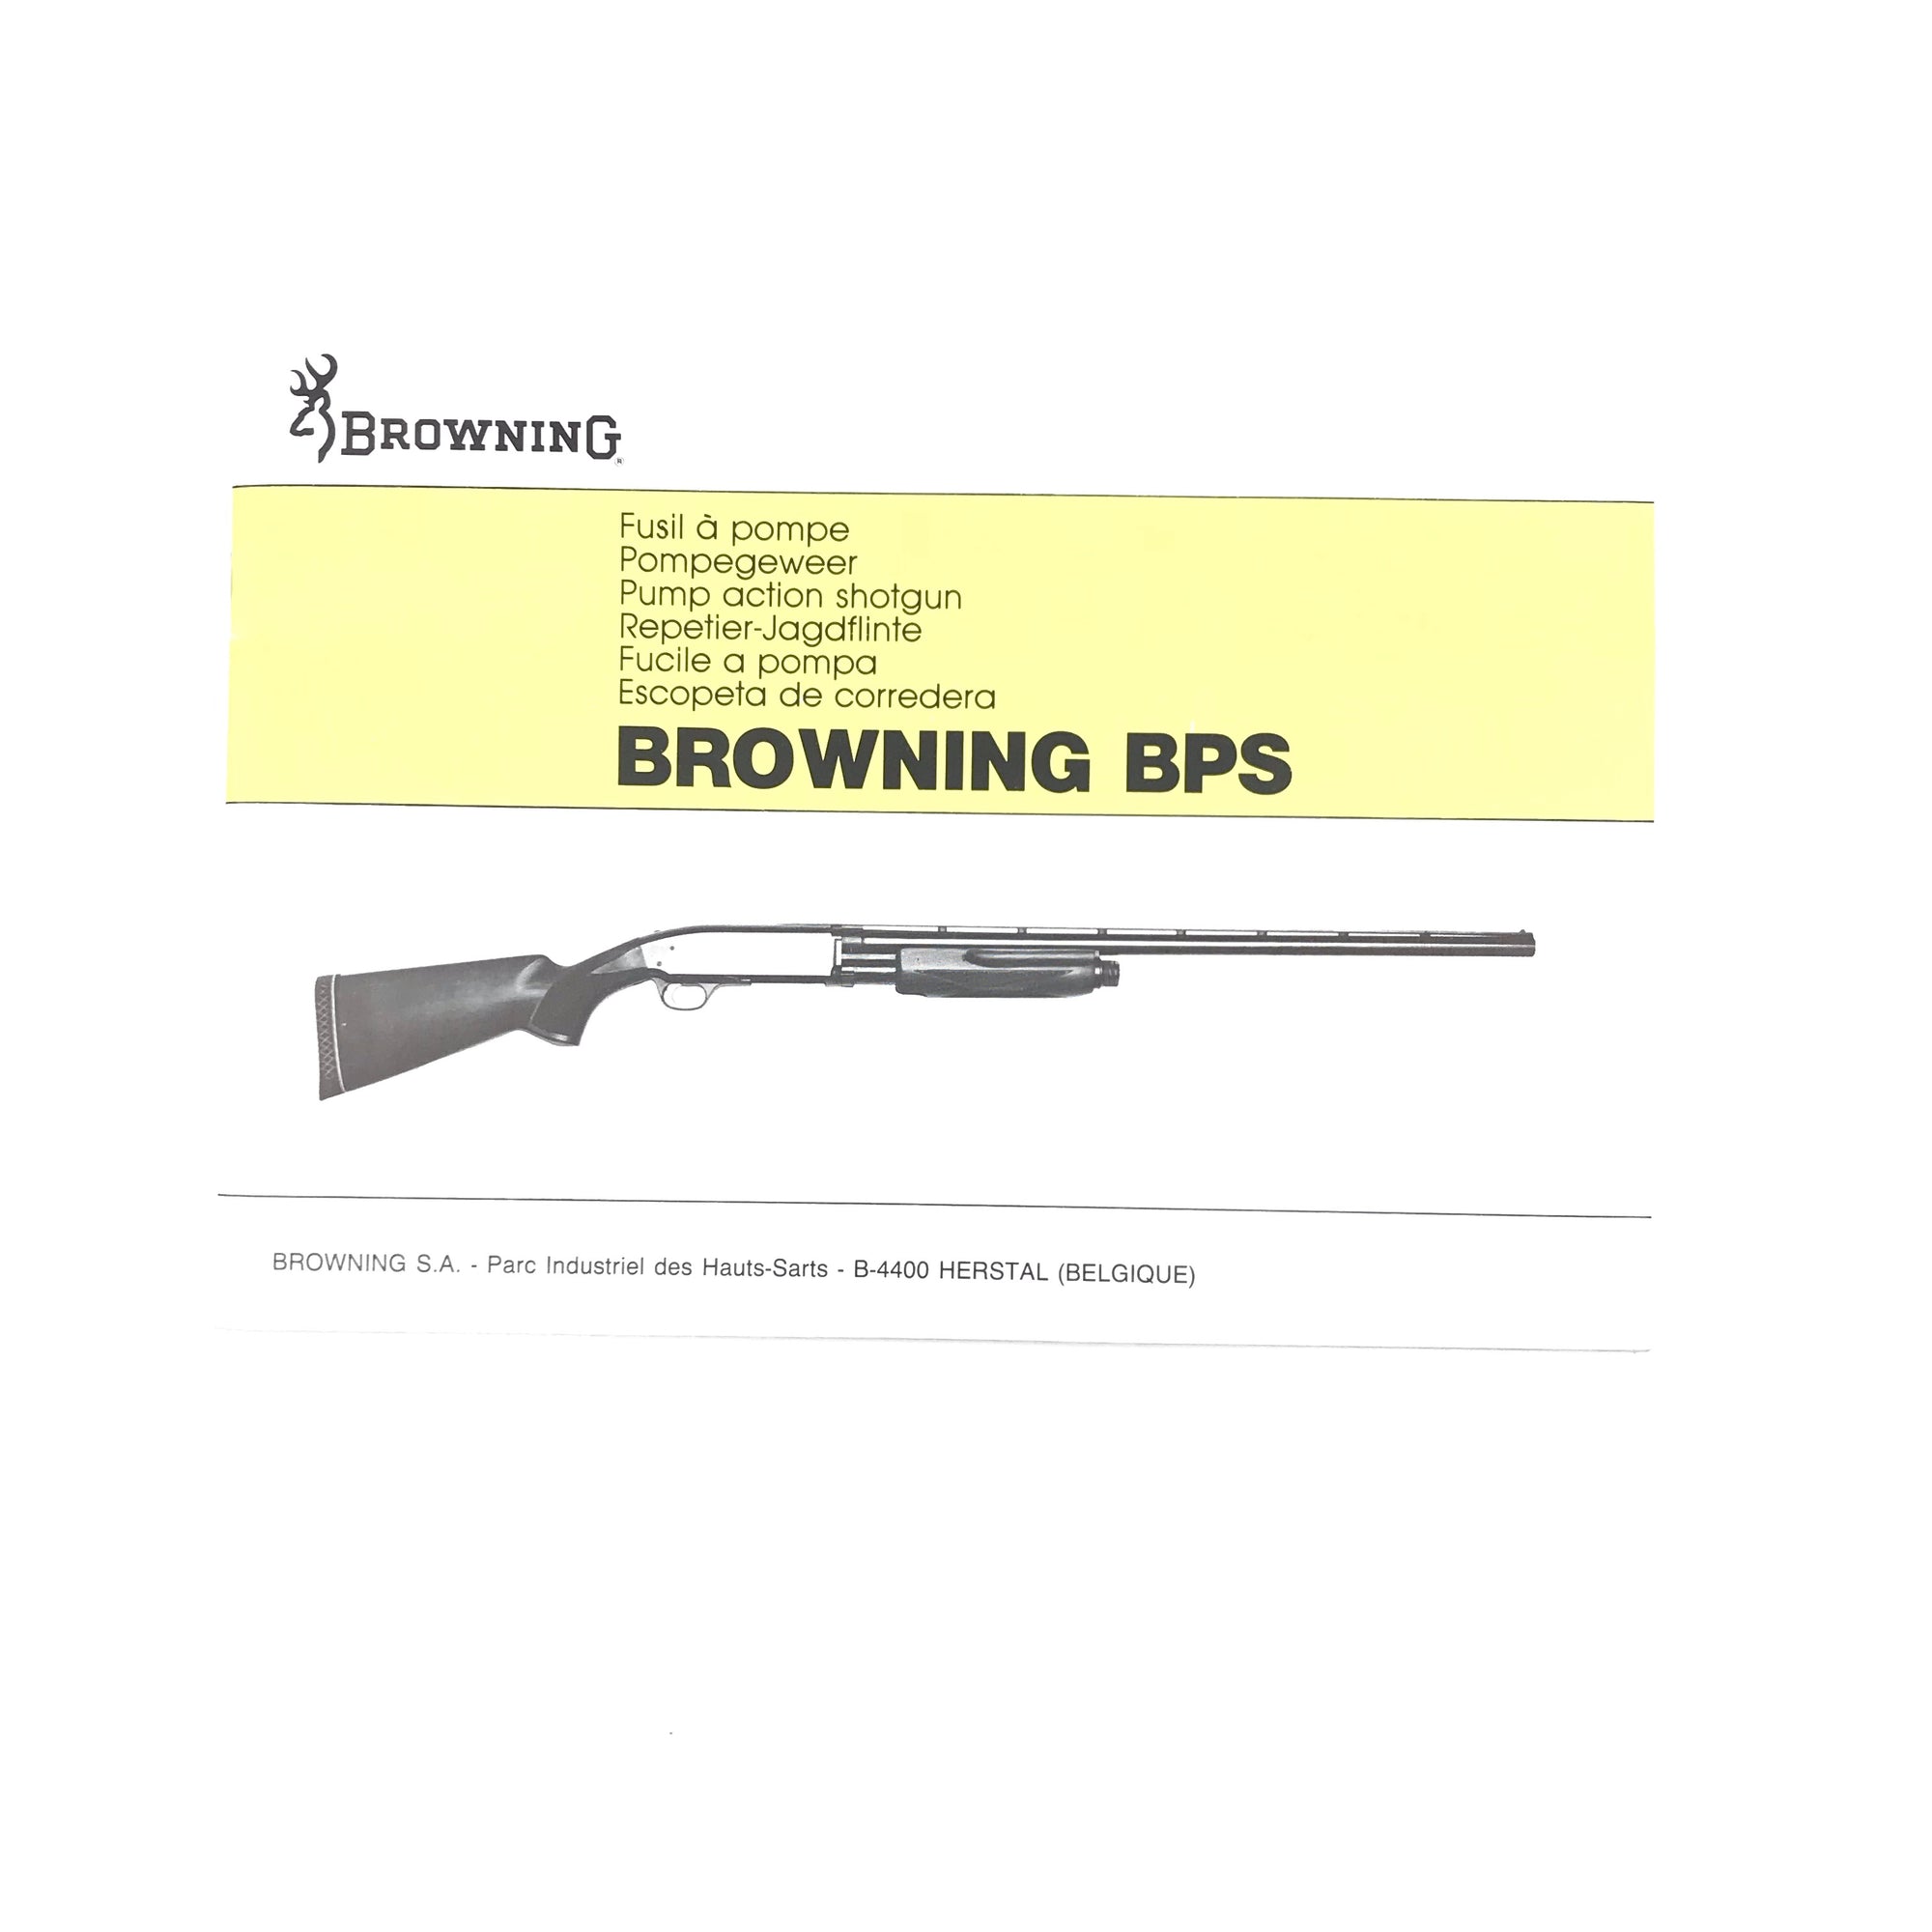 Browning BPS Pump Action Shotgun/Operation & Care pamphlet - Canada Brass